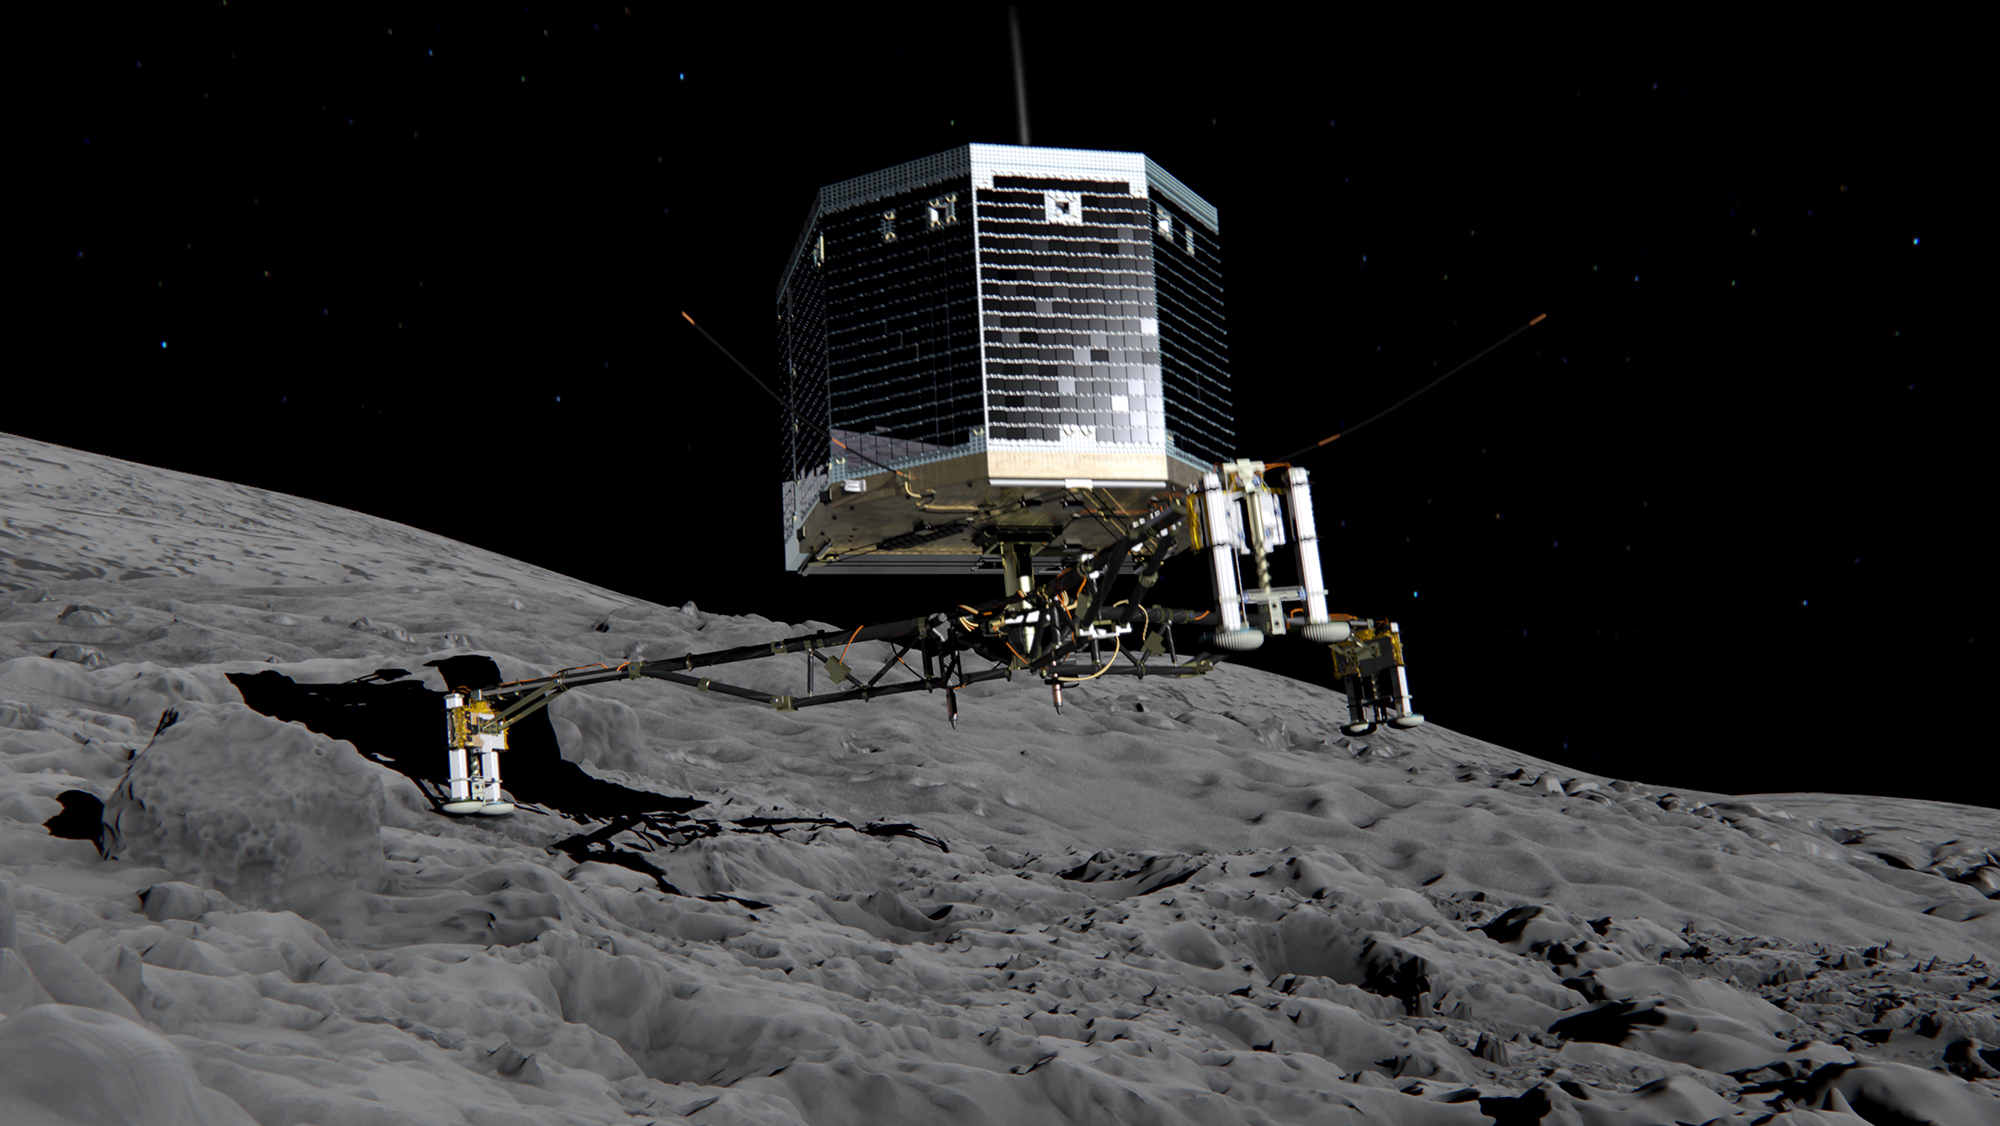 space-craft-philae-lander-finds-organic-molecules-on-the-surface-of-the-comet